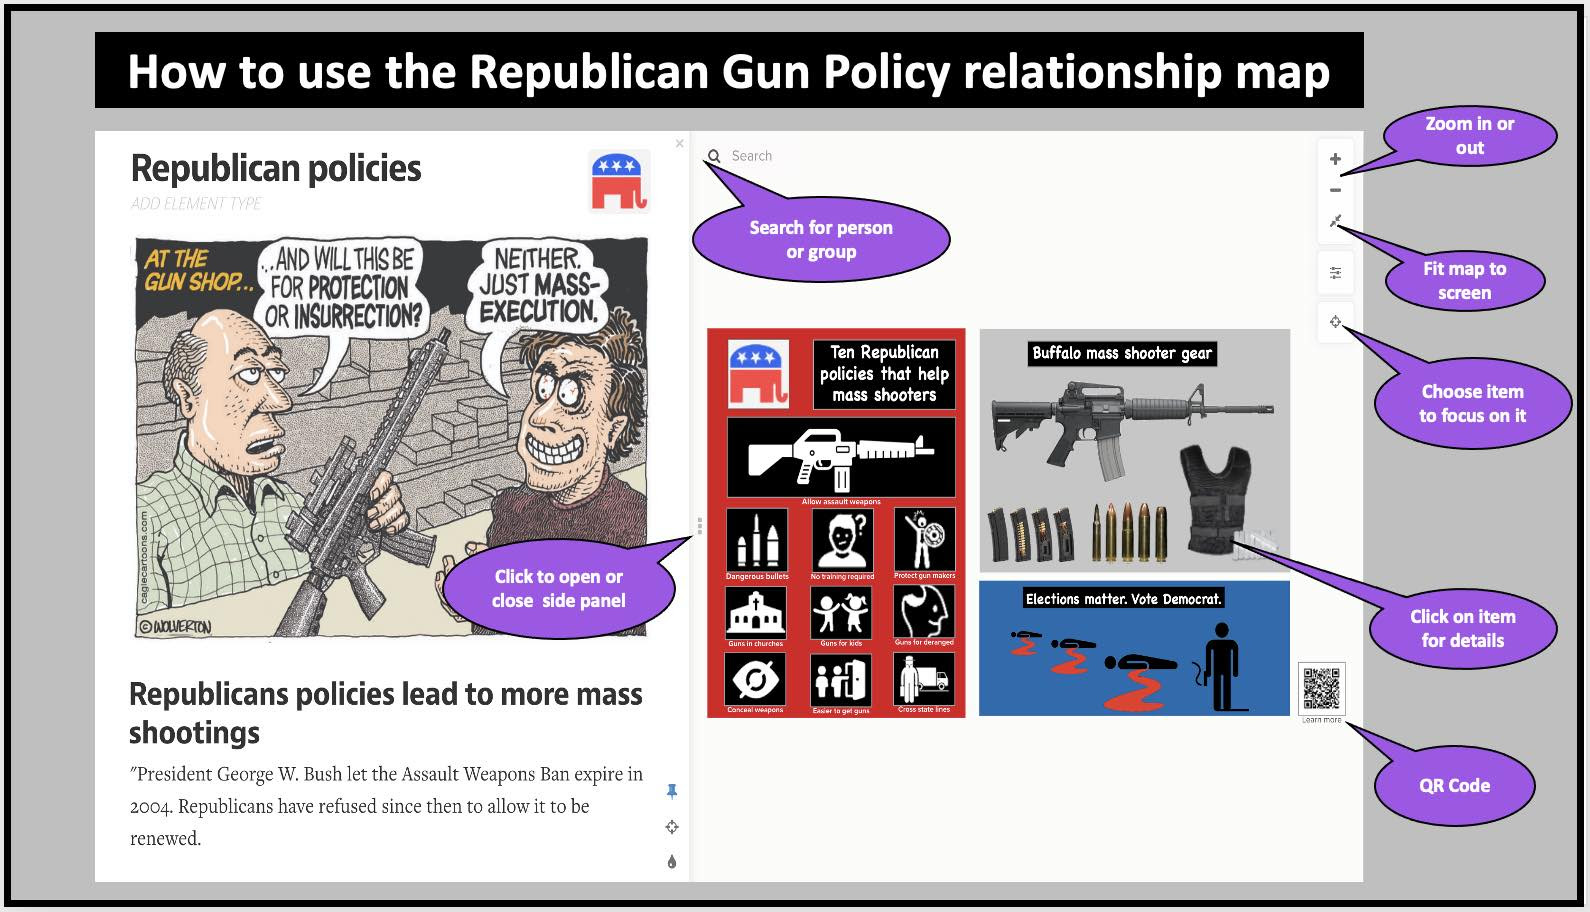 See the connection between Republican policies and the surge in mass shootings with this relationship map